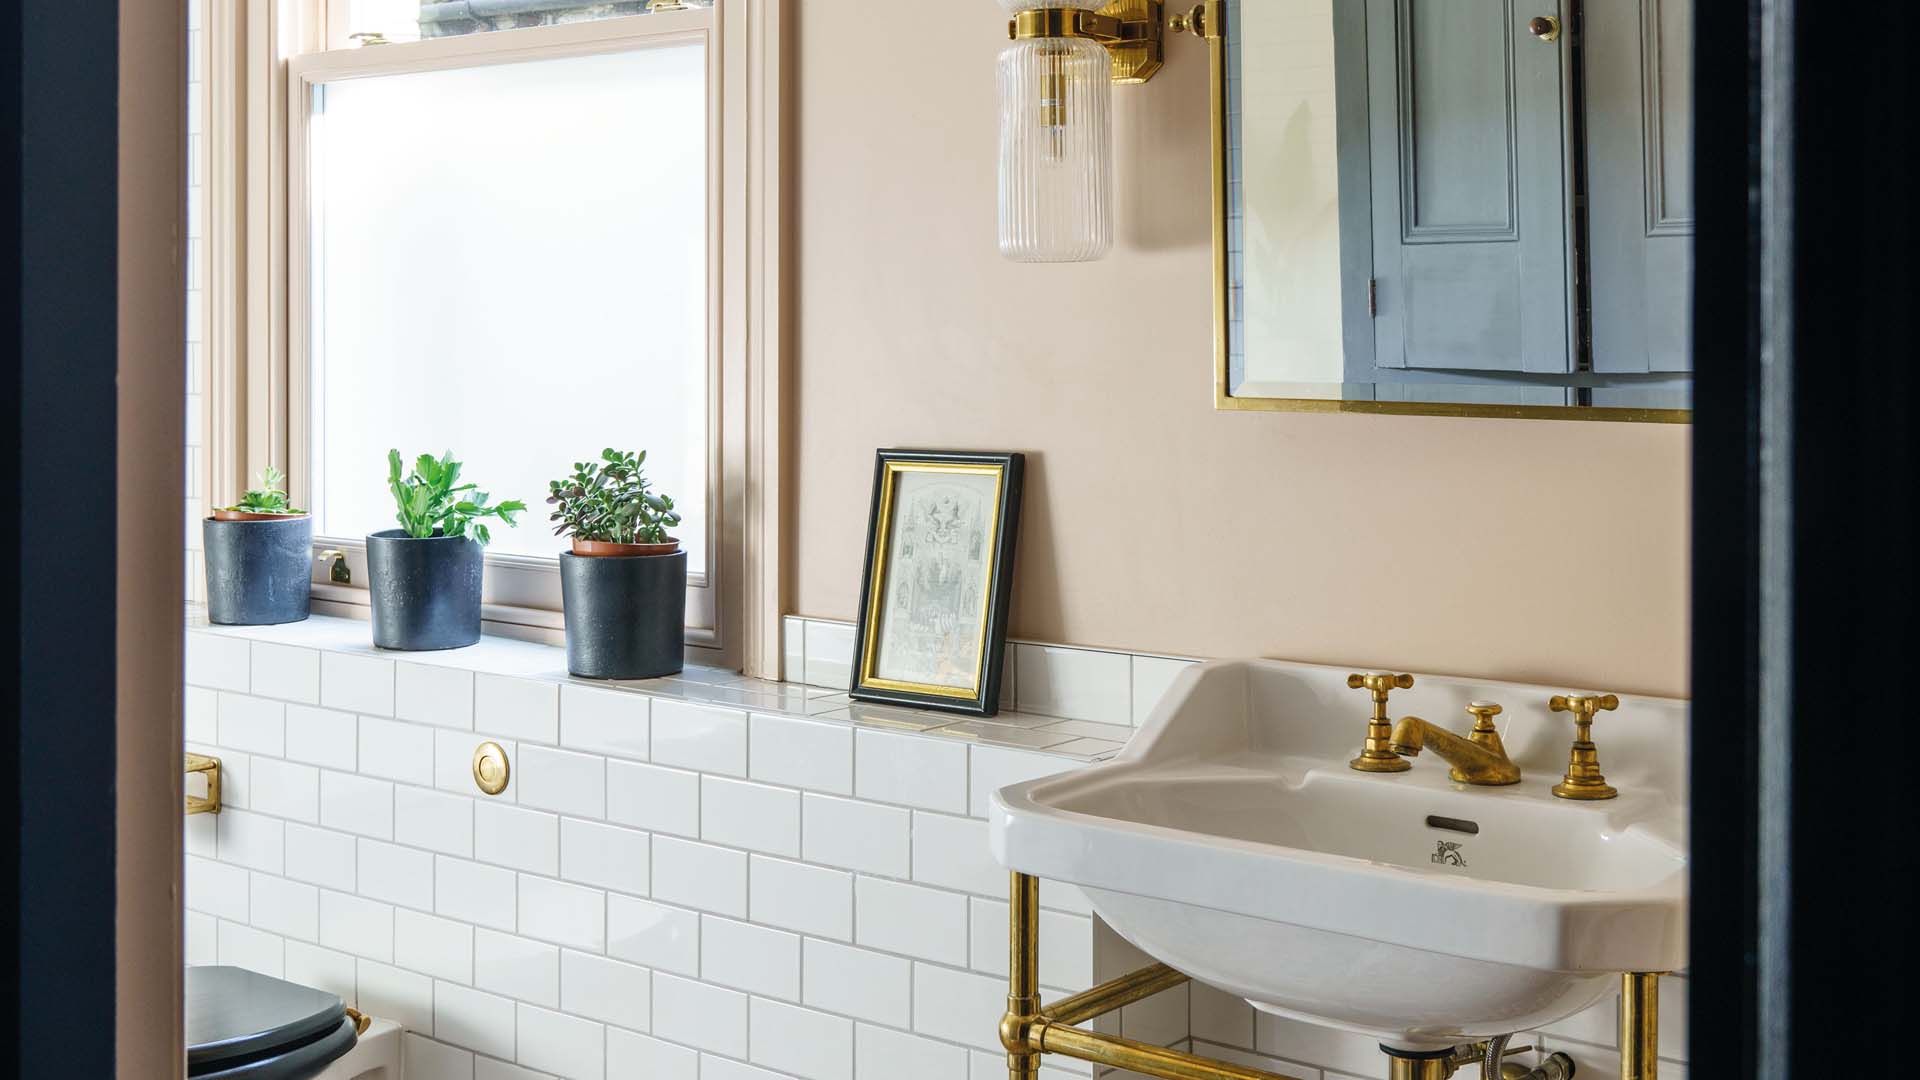 A calming bathroom decorated in white and peach tones